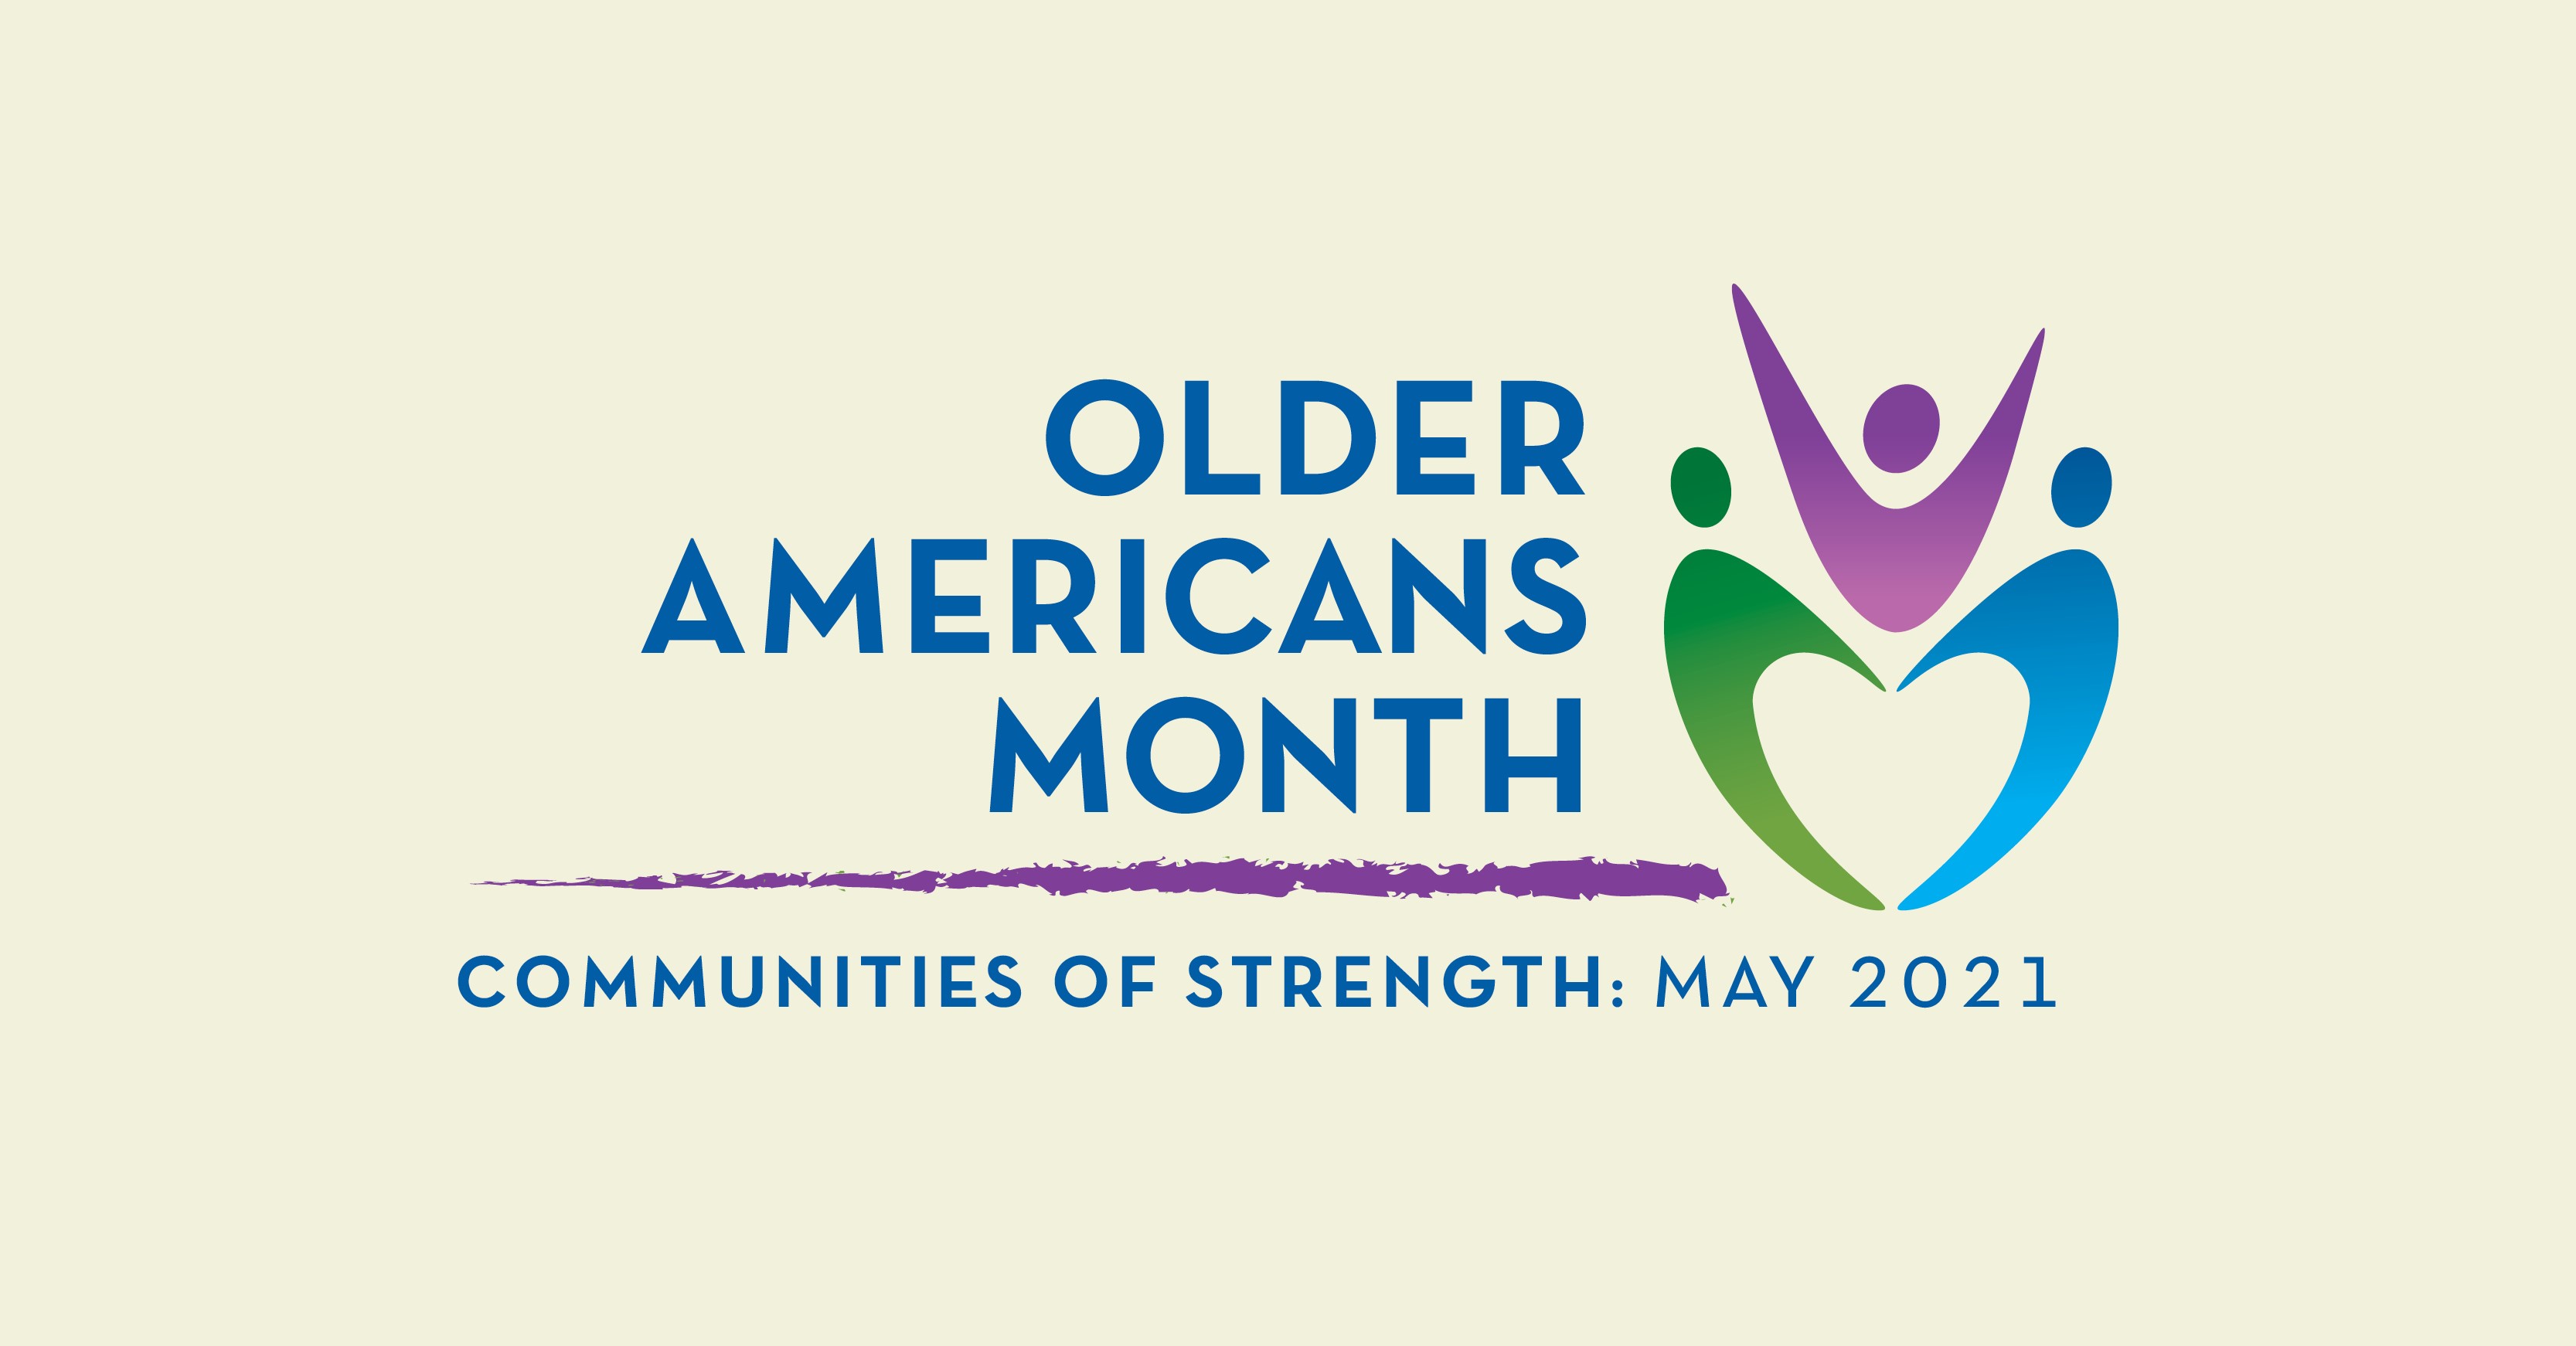 Social Media Graphic: Older Americans Month, Communities of Strength, May 2021